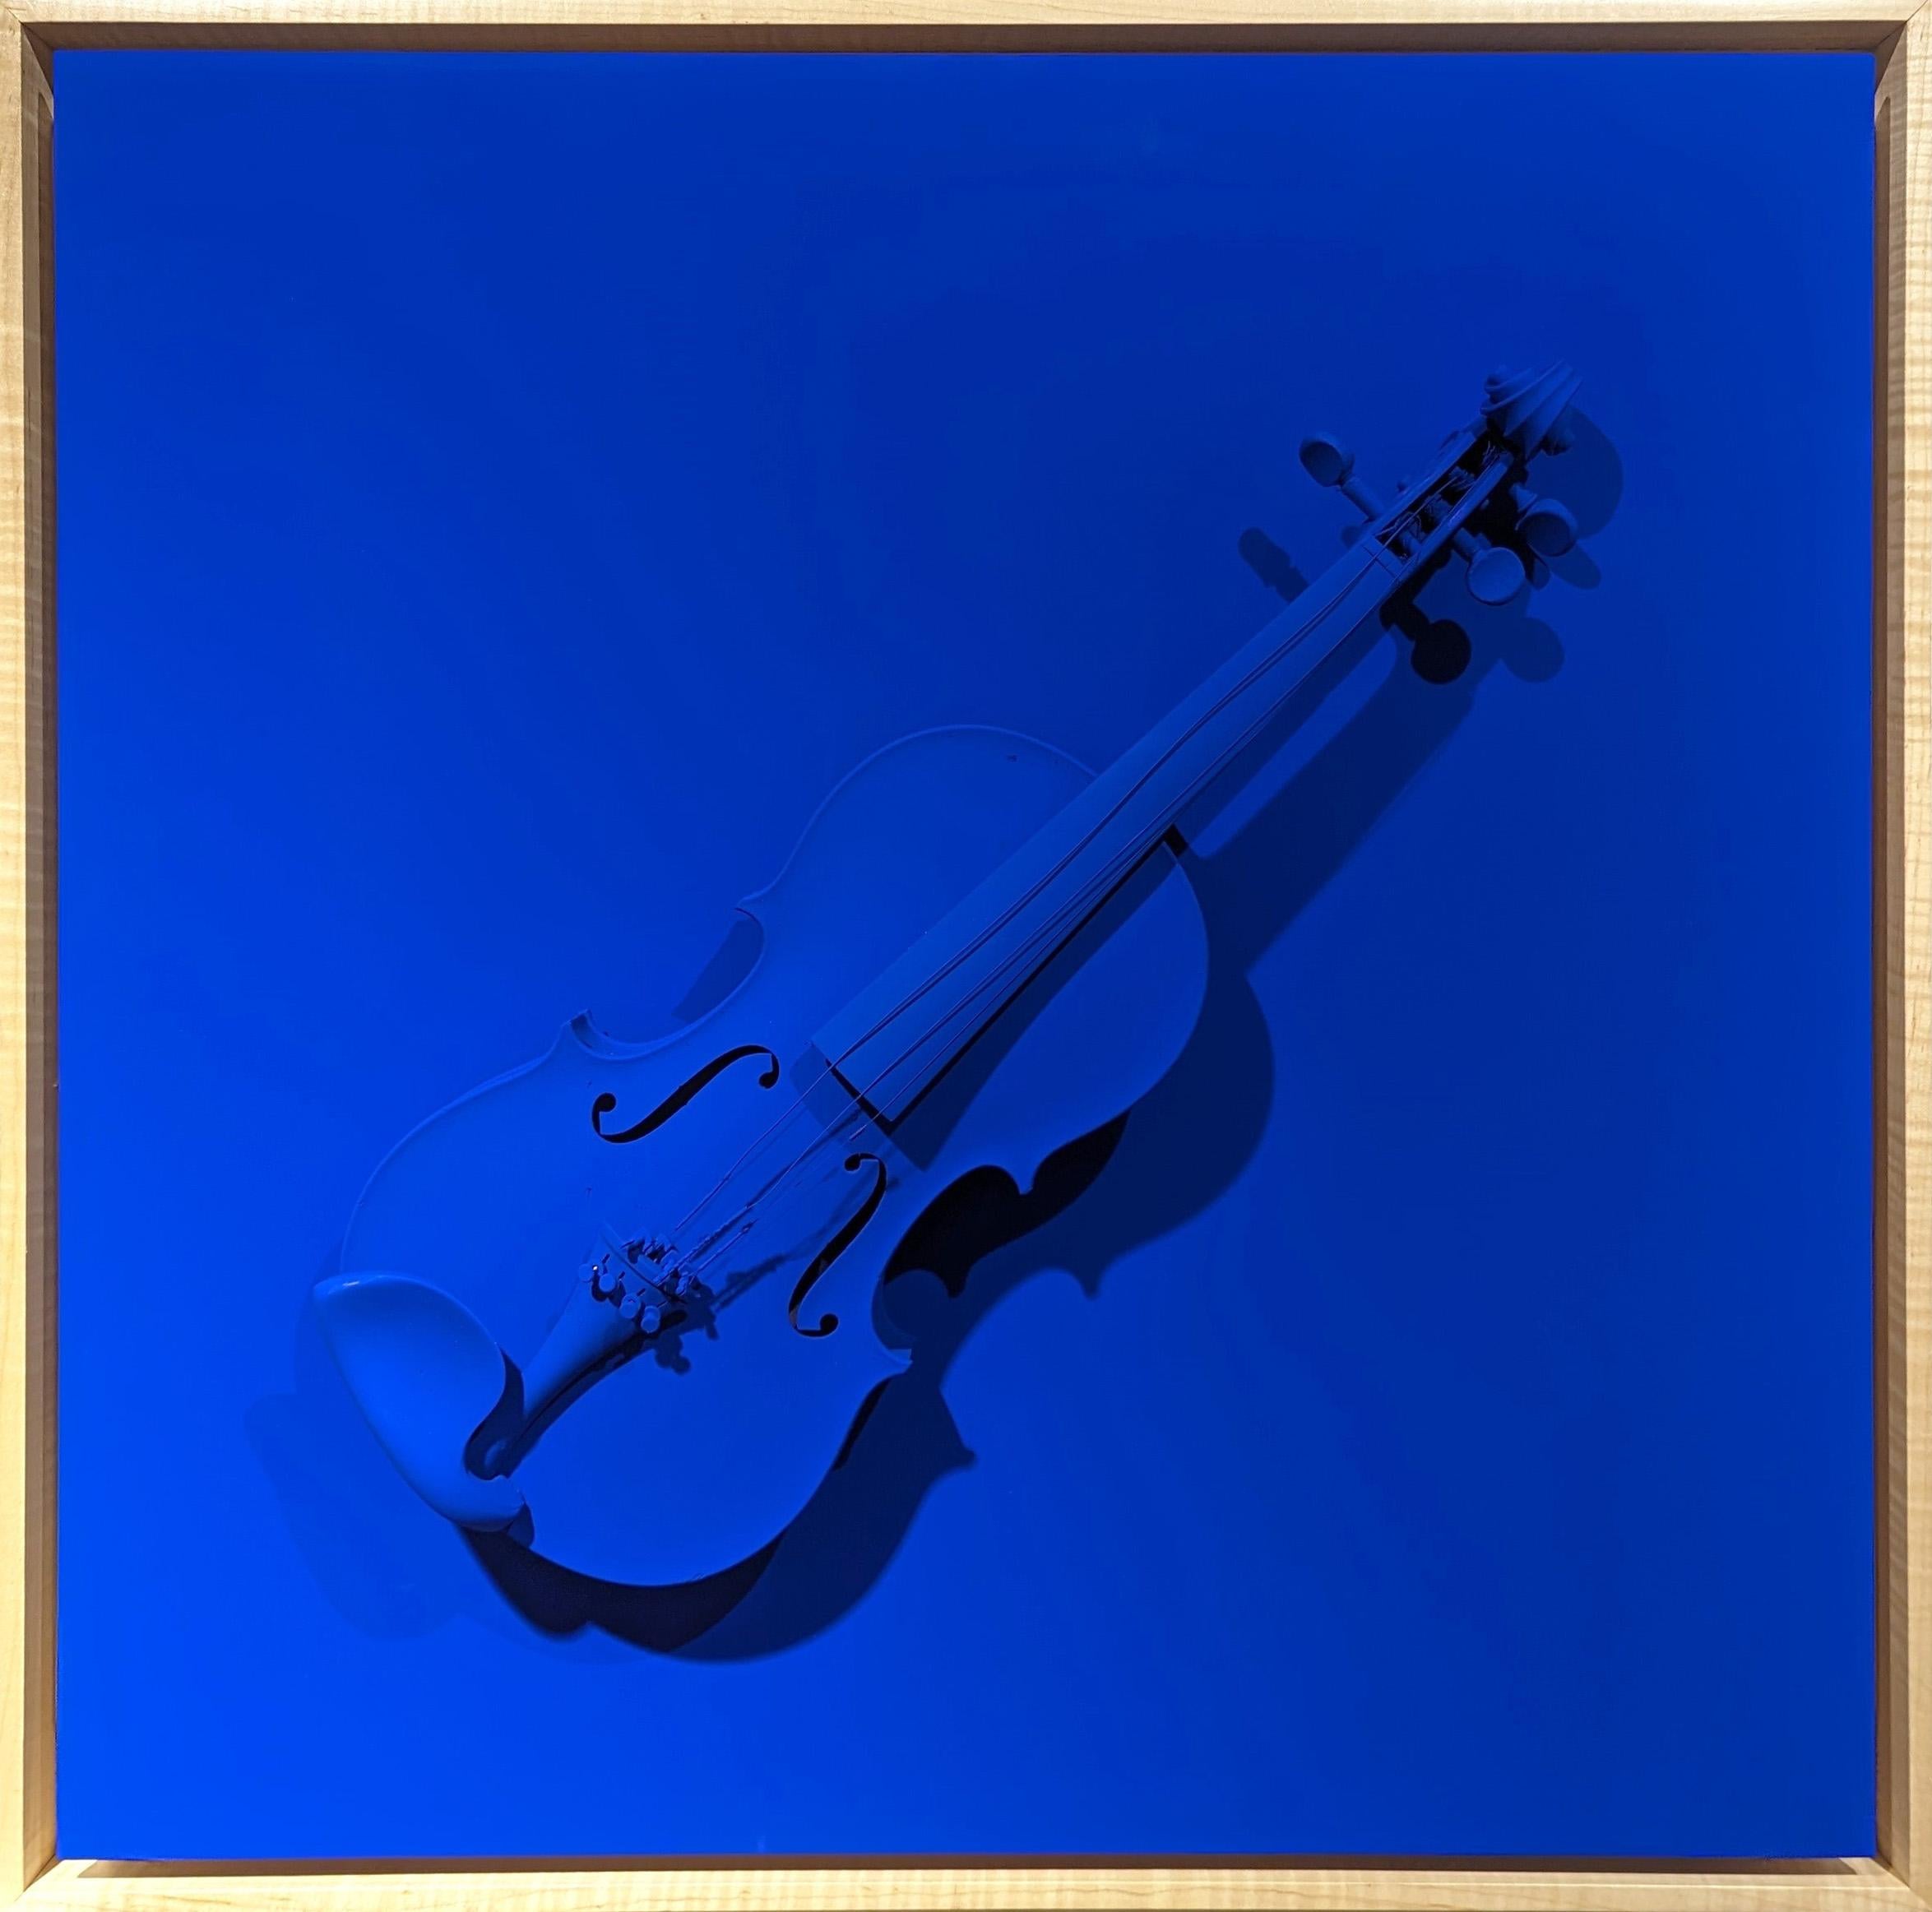 "Pearlman Blue" Contemporary Bright Blue Found Object Violin Sculpture Painting - Mixed Media Art by Paul Reeves